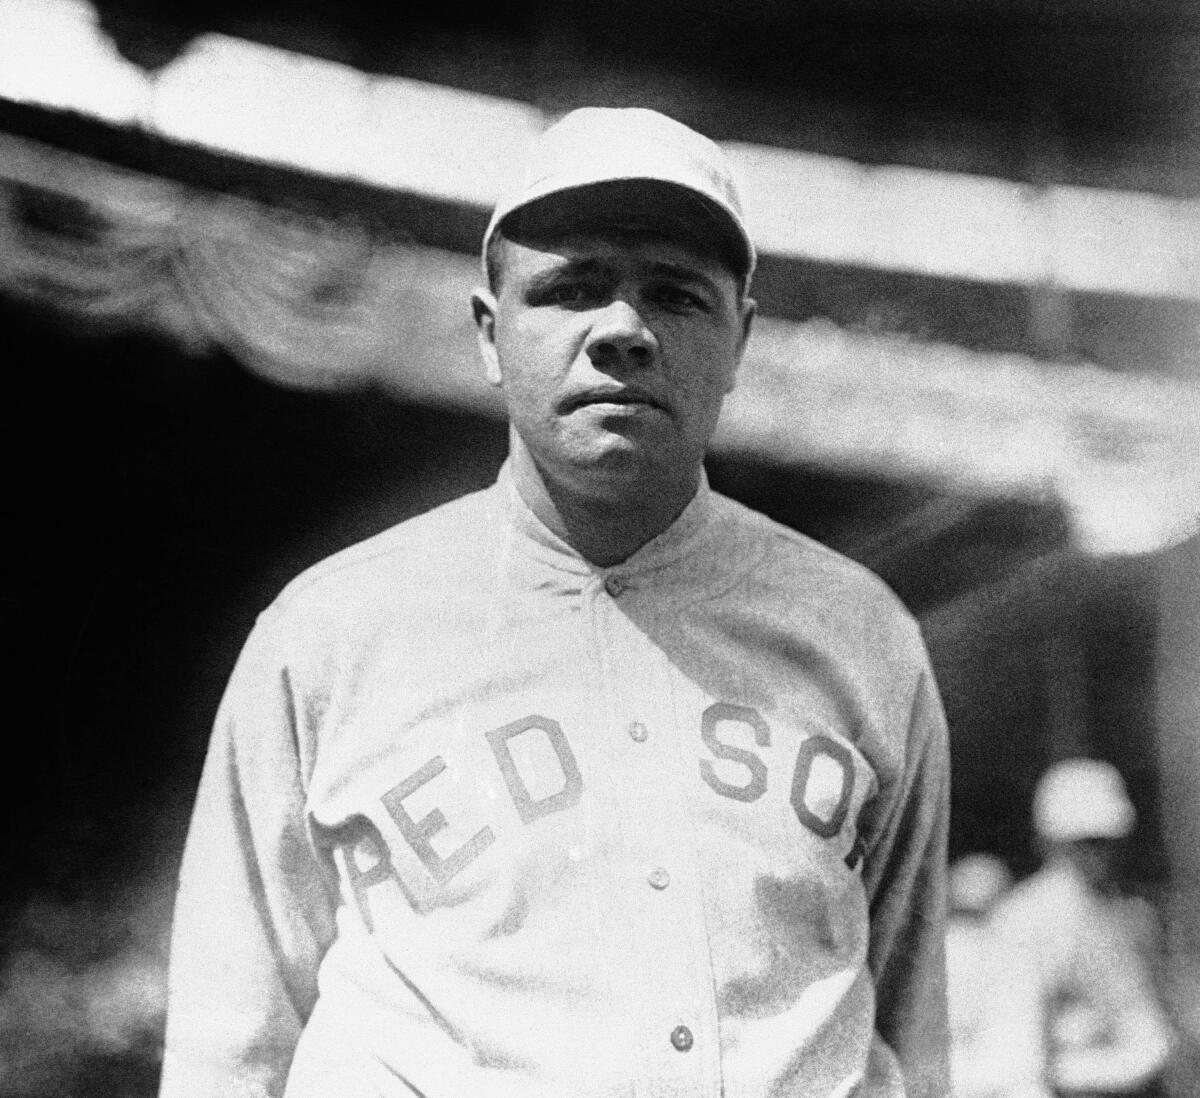 This 1919 photo shows Boston Red Sox player Babe Ruth